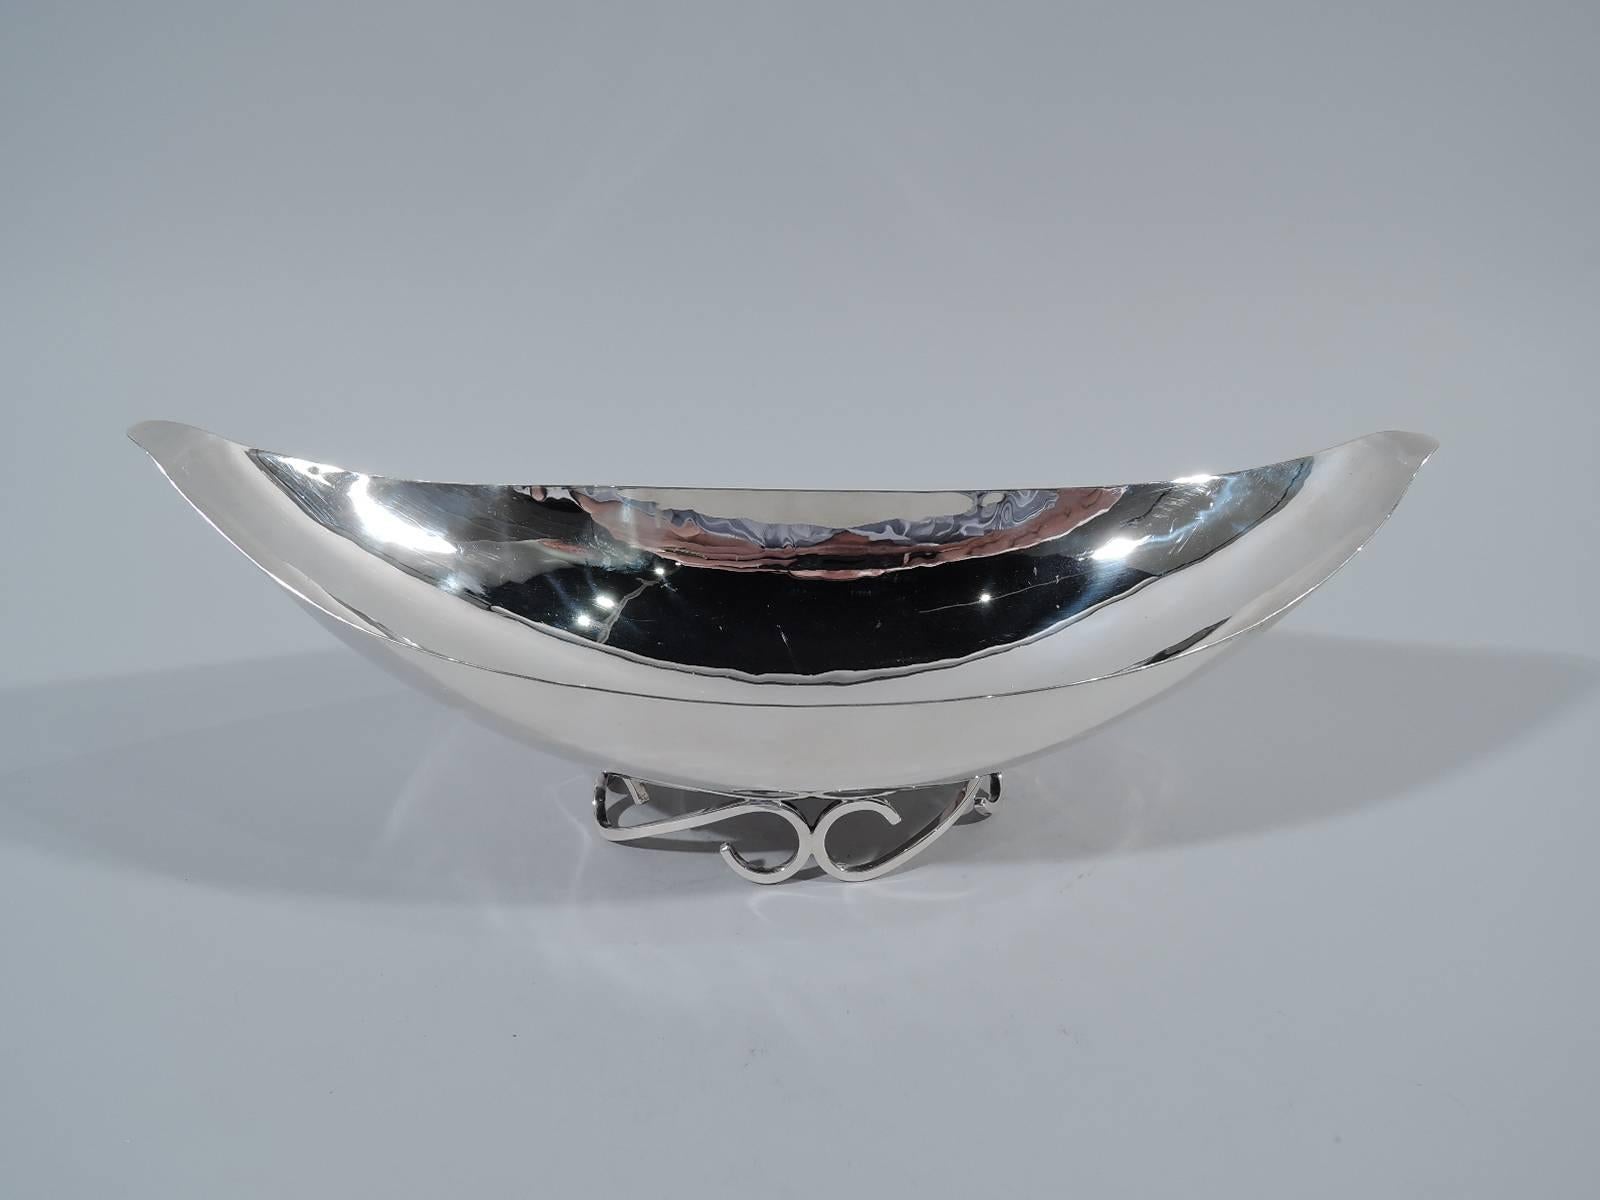 Mid-Century Modern sterling silver bowl. Made by Alfredo Sciarotta in Newport, Rhode Island. Gondola form with tapering ends. Visible hand-hammering. Rests on two joined and open s-scroll supports. Hallmark includes no. 93 and phrase “handmade”.